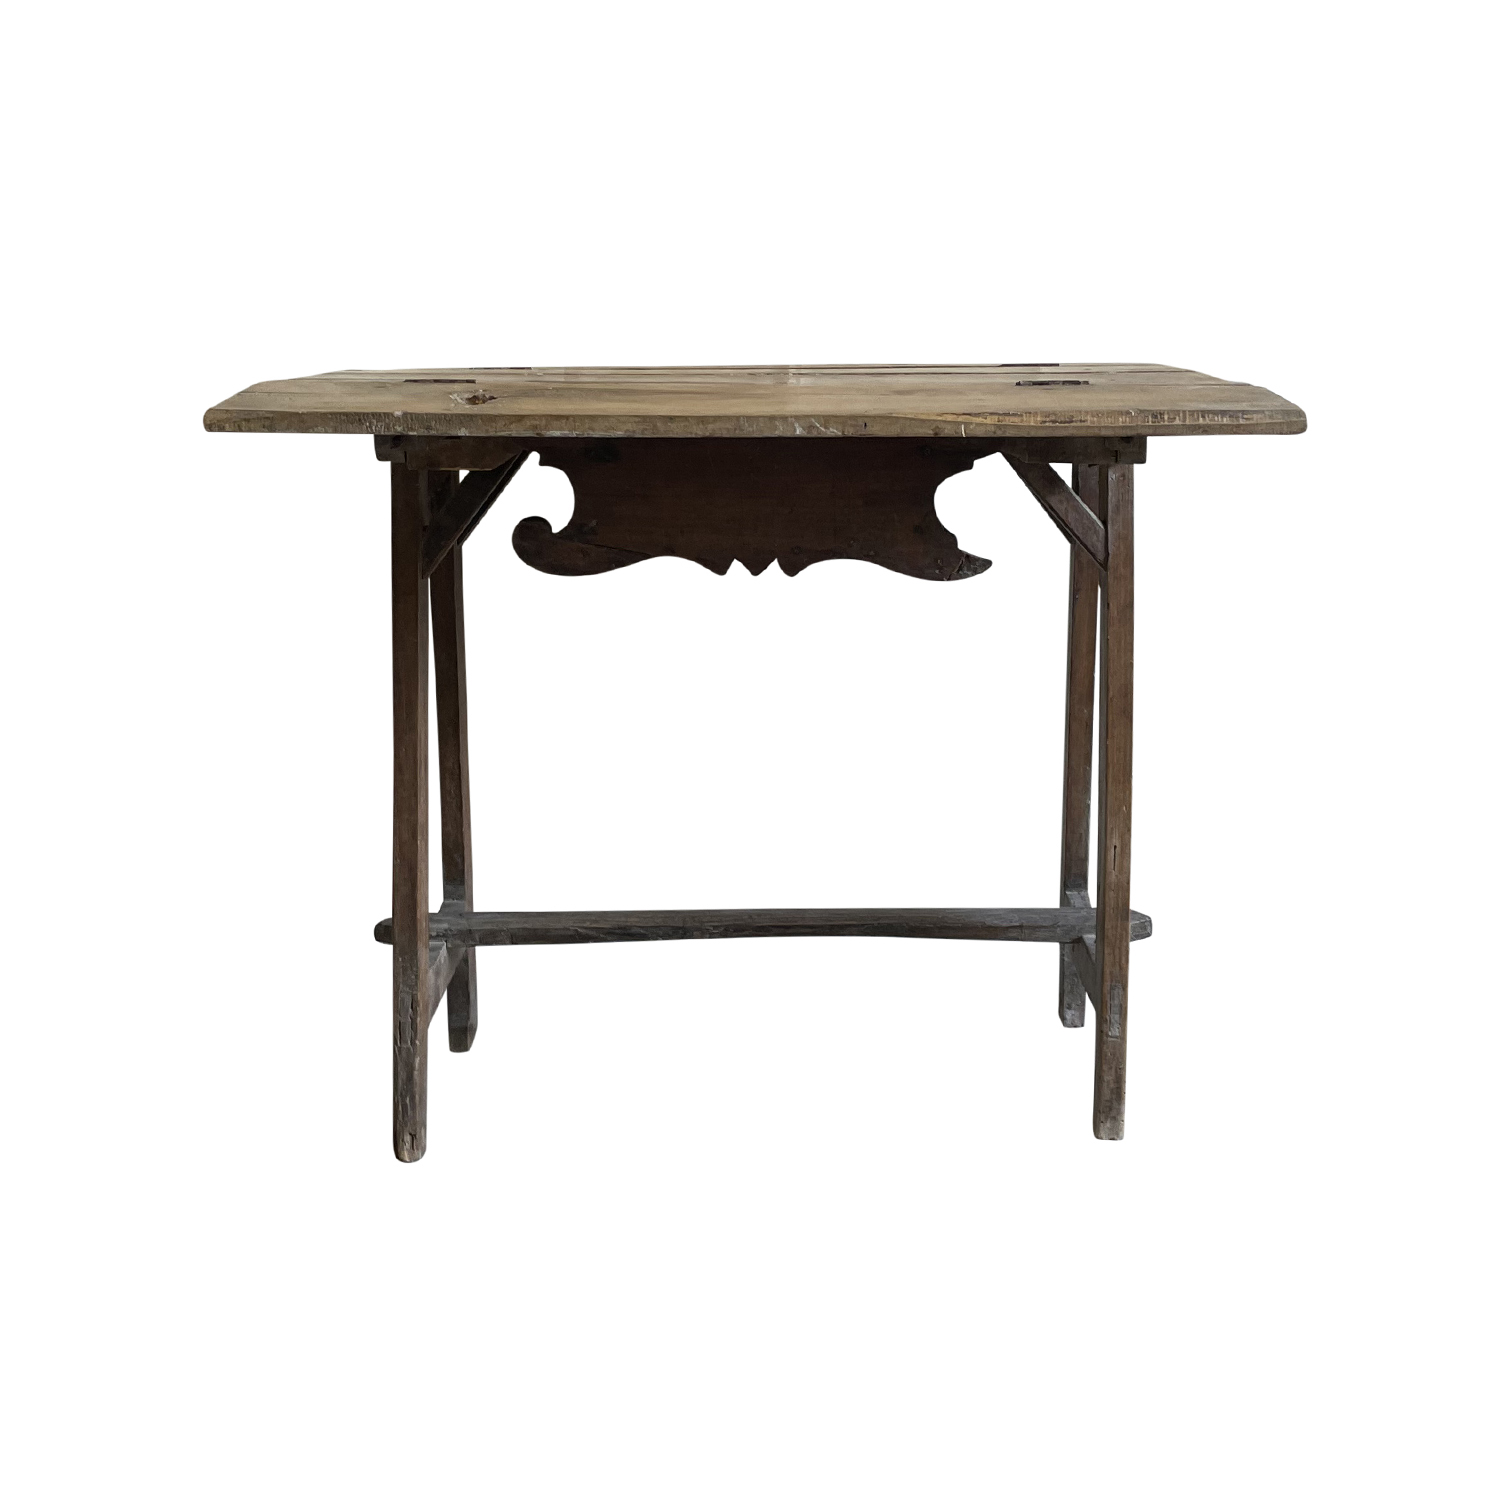 18th Century Italian Small Foldable Walnut Side Table – Antique Tuscan Table